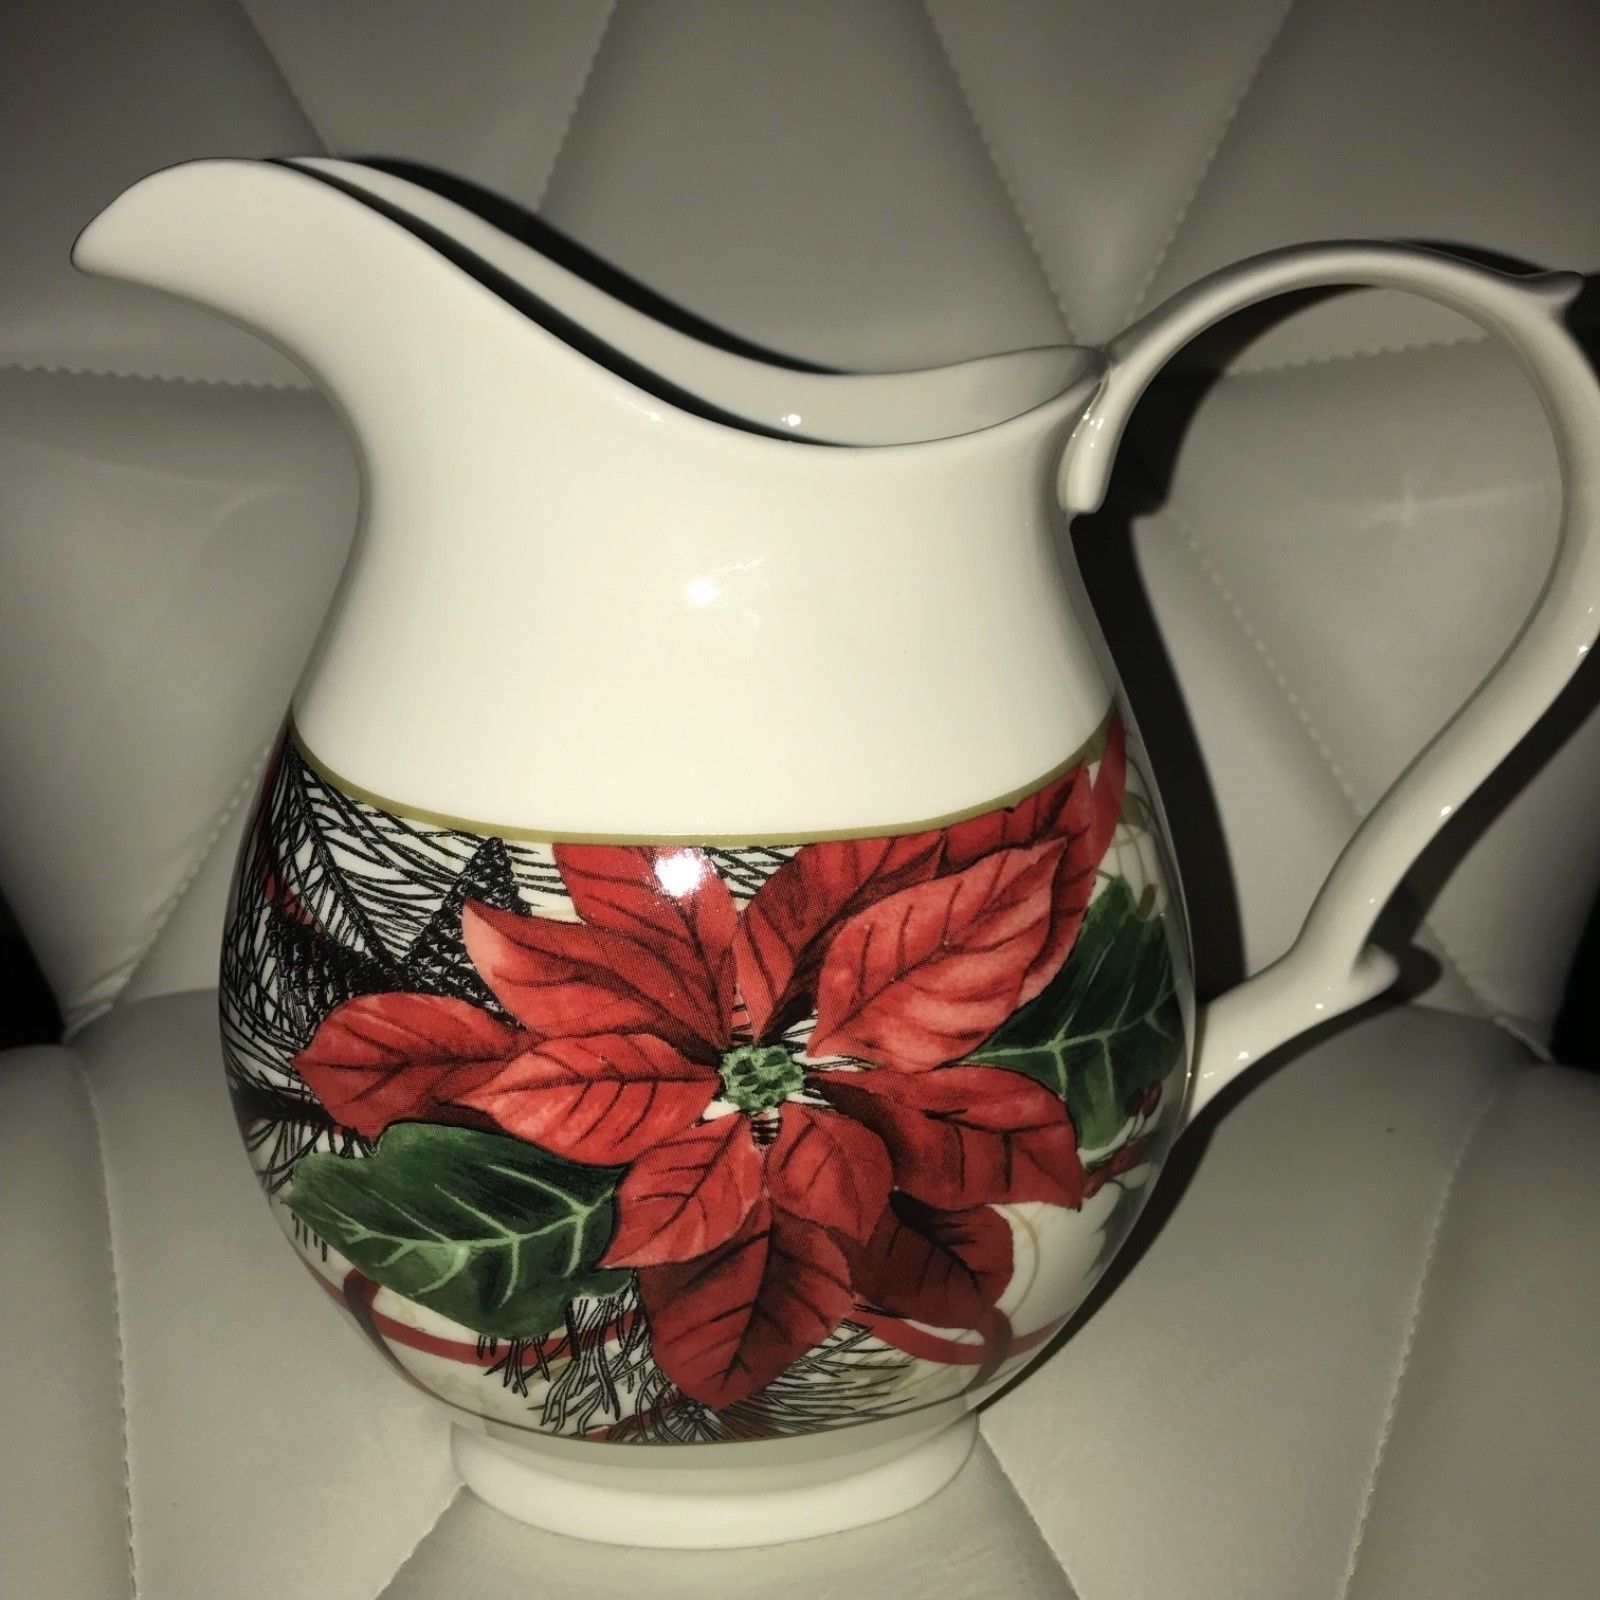 222 FIFTH Holidays Wishes Christmas Milk Water Pitcher ~NEW ~ - $37.99